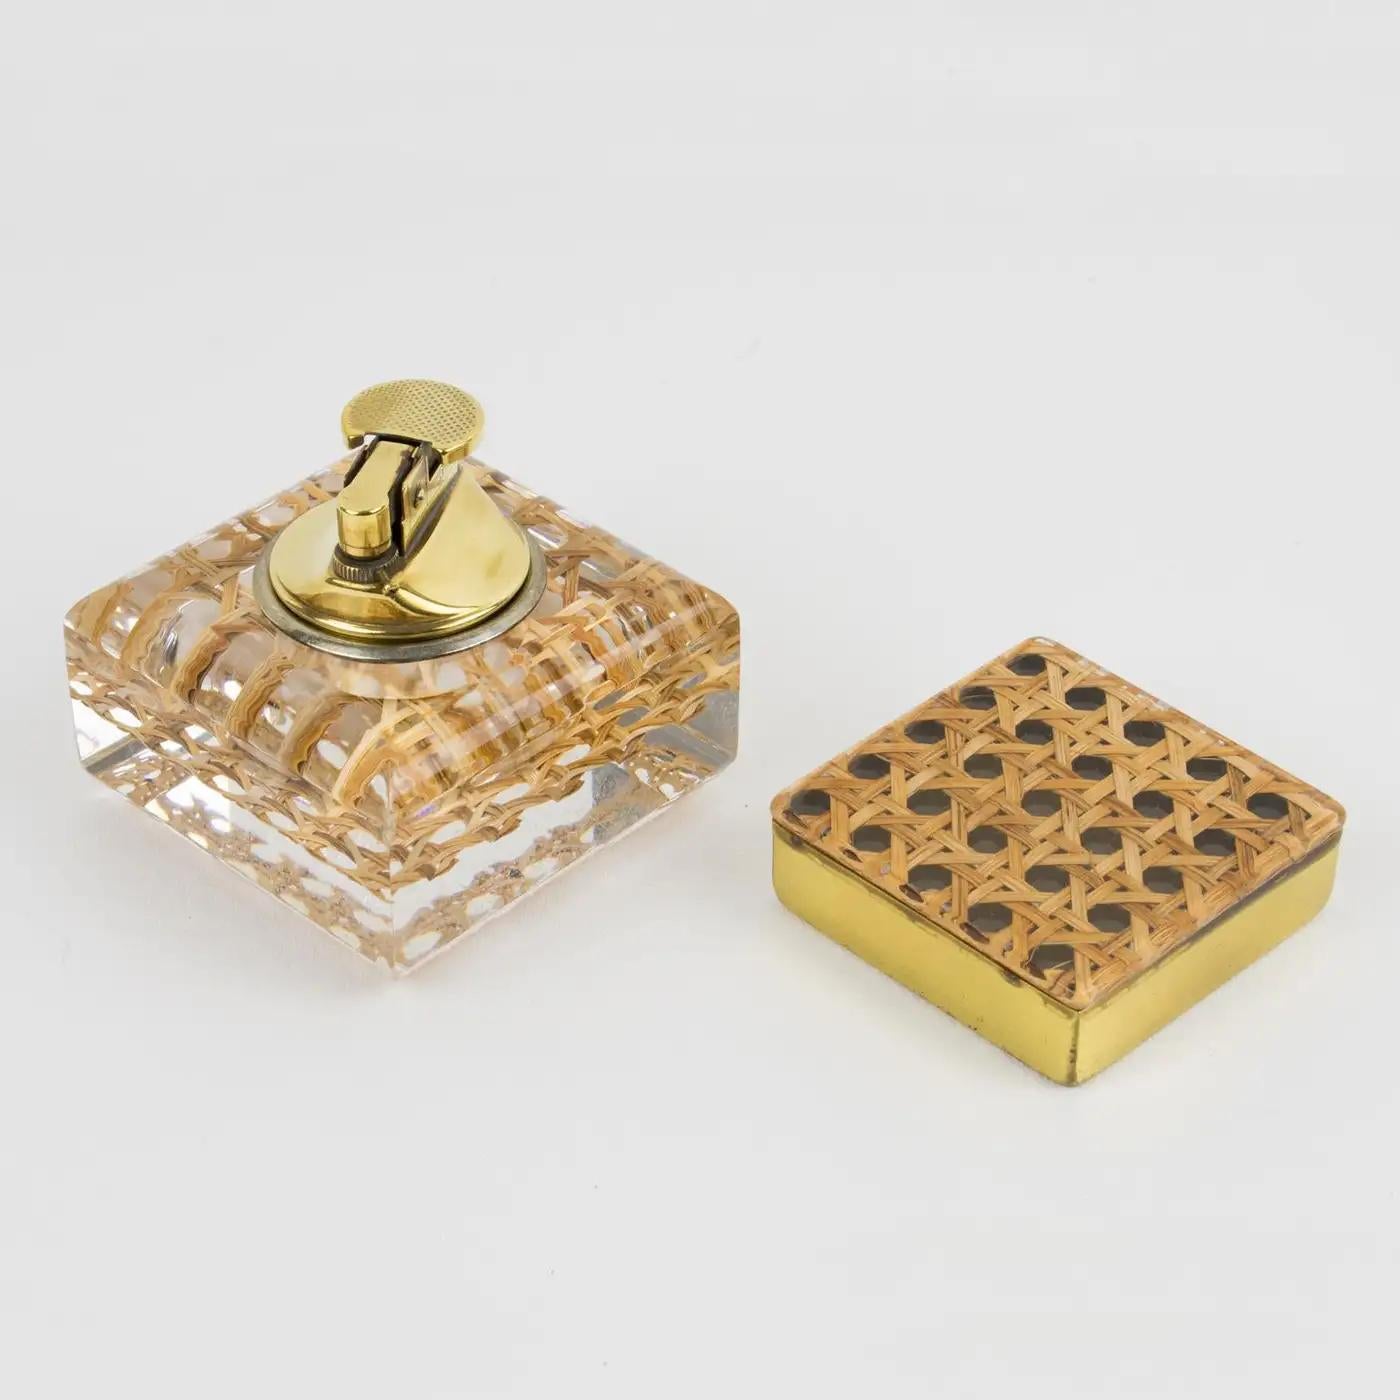 This stunning smoking set features a lighter and a box in crystal clear Lucite with real cane-work or rattan inclusions and was manufactured in the 1970s. The tobacco accessory set comprises a gaslighter and a square-shaped box for matches. The